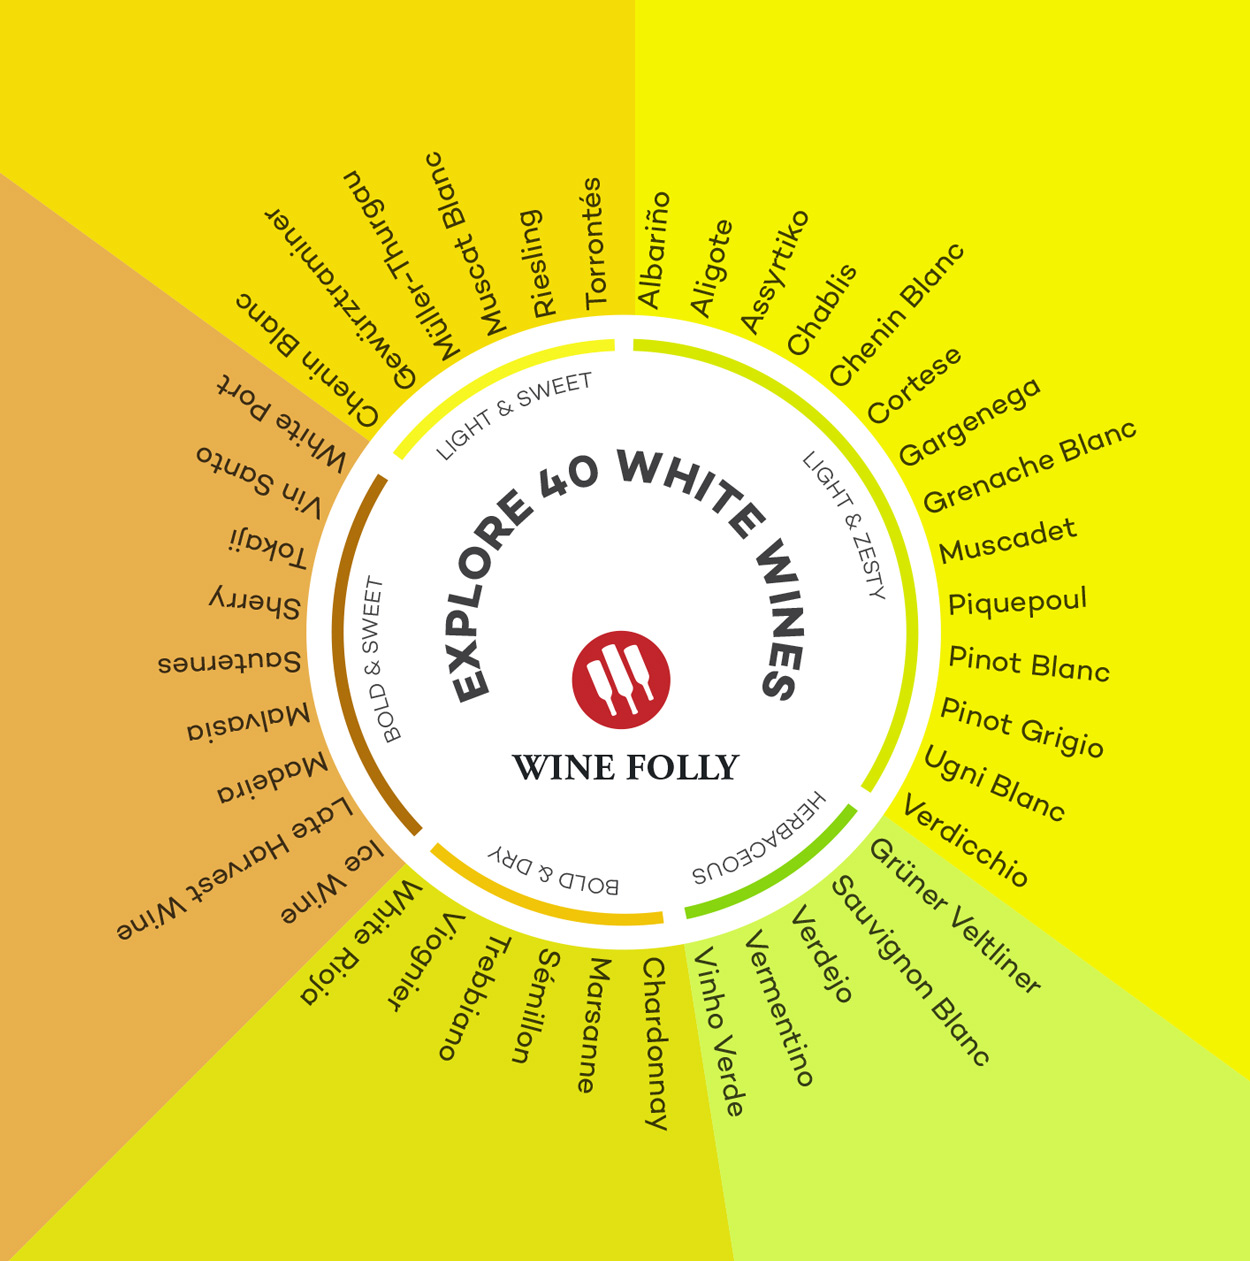 White Wines List for Beginners